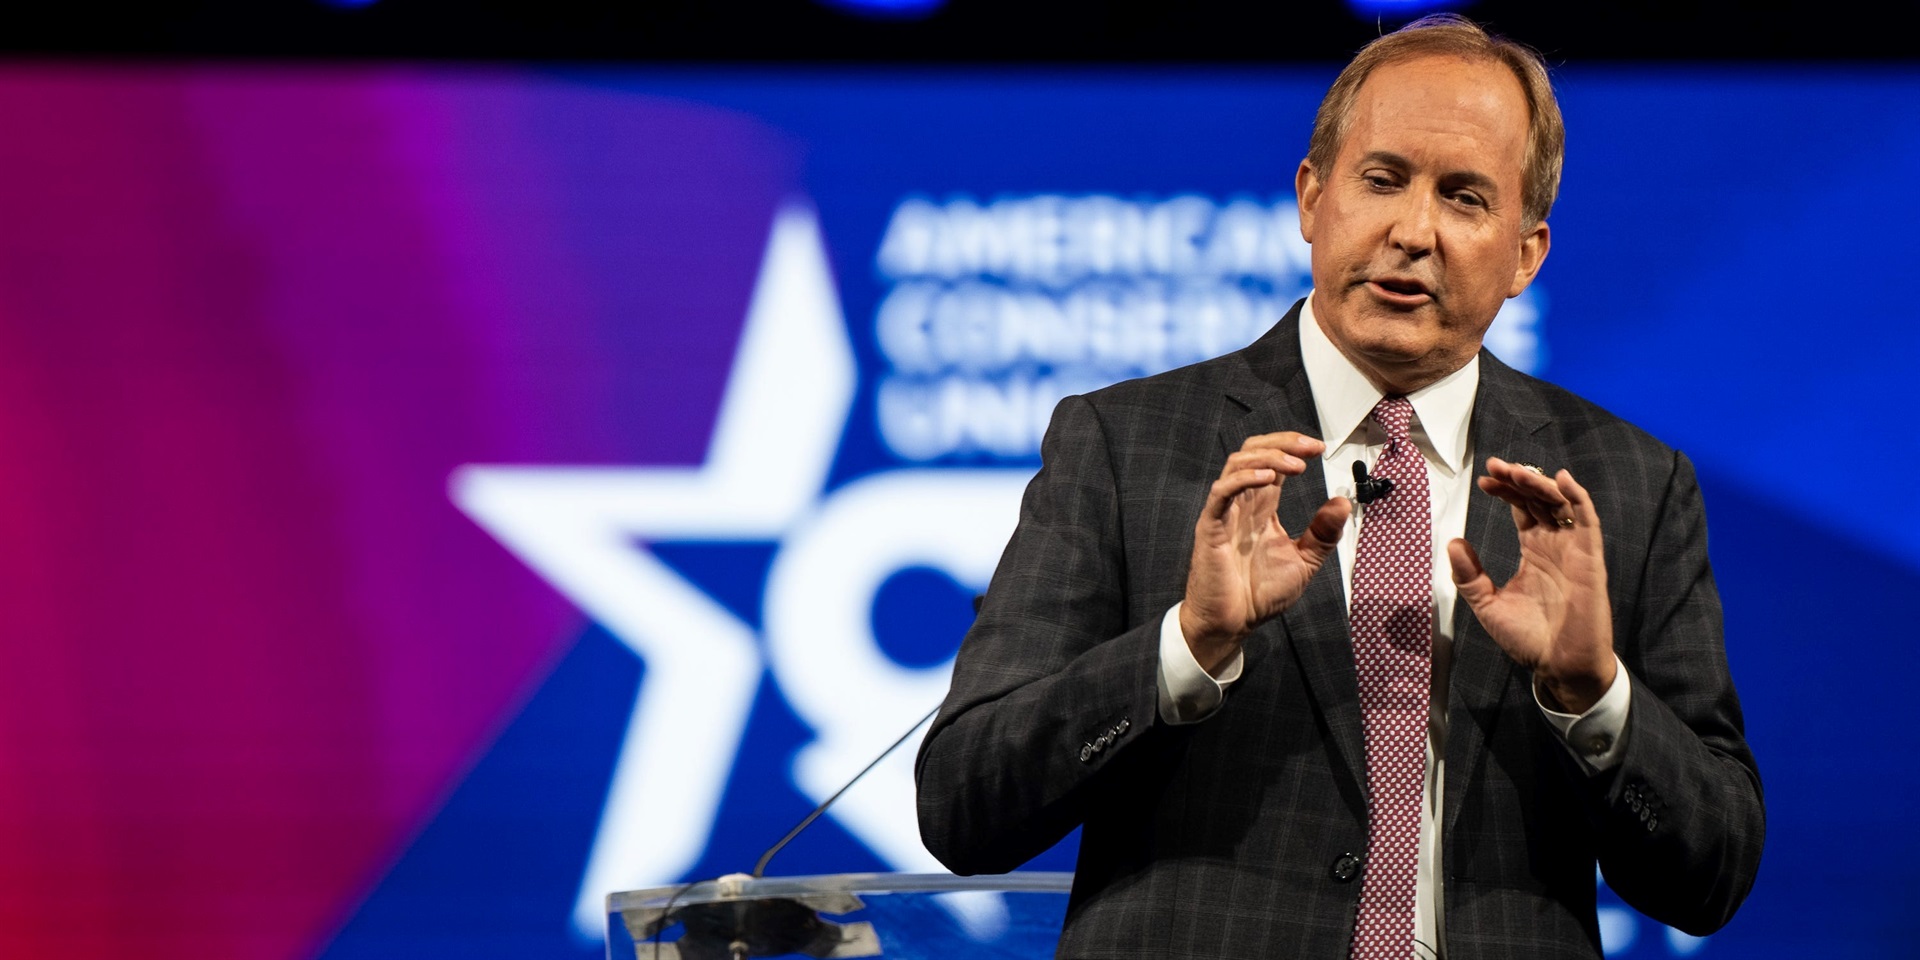 Texas Attorney General Ken Paxton. Photo by Brandon Bell/Getty Images